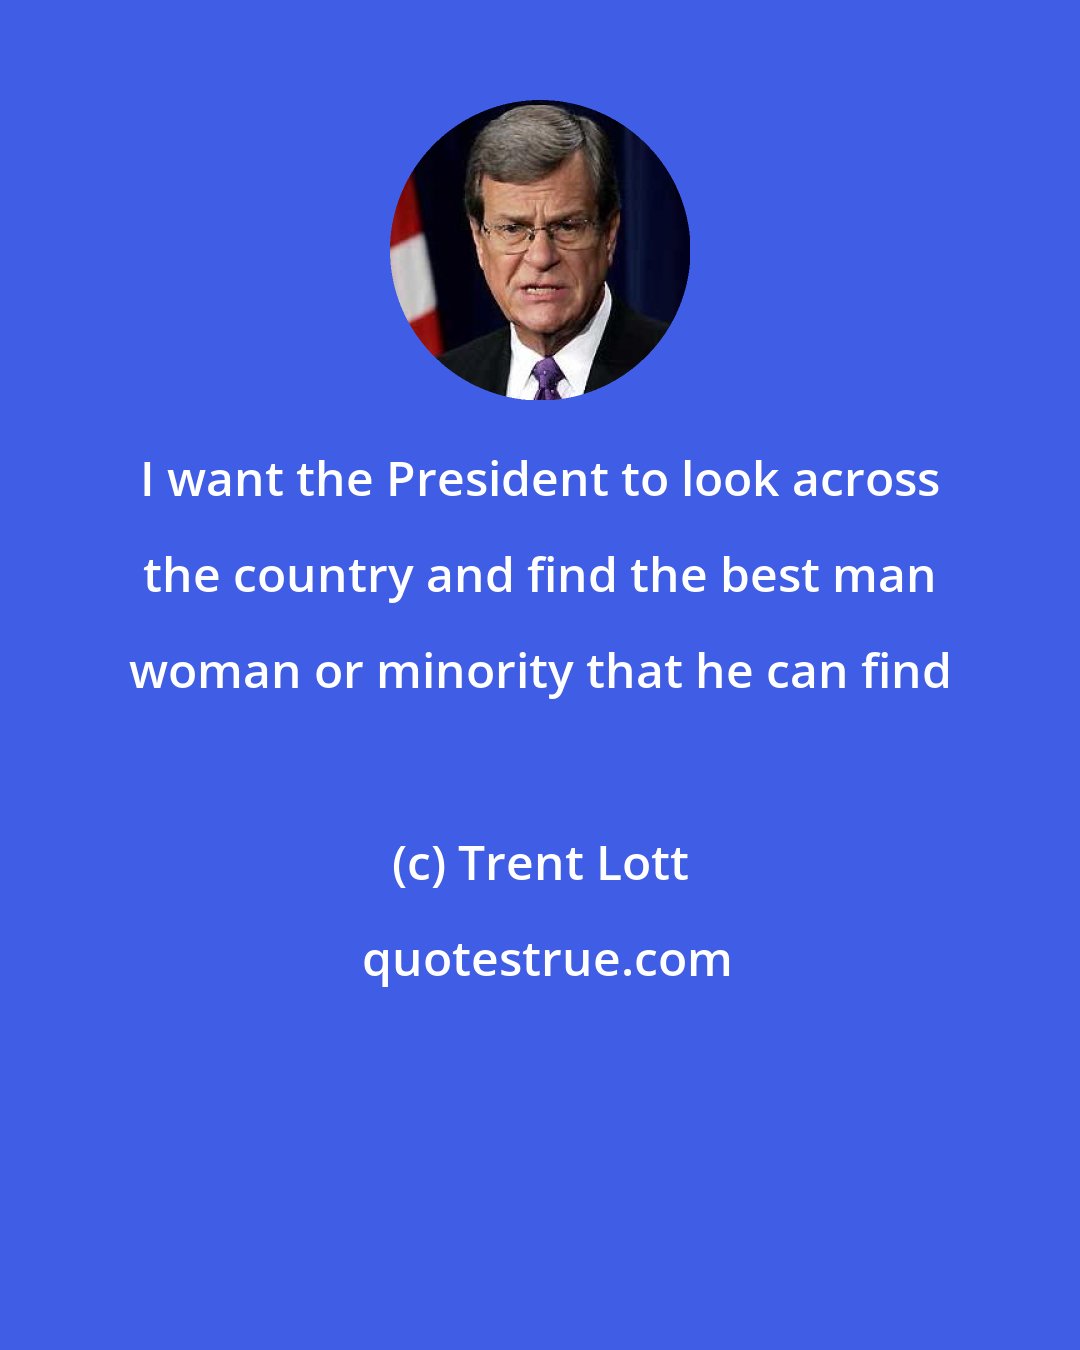 Trent Lott: I want the President to look across the country and find the best man woman or minority that he can find